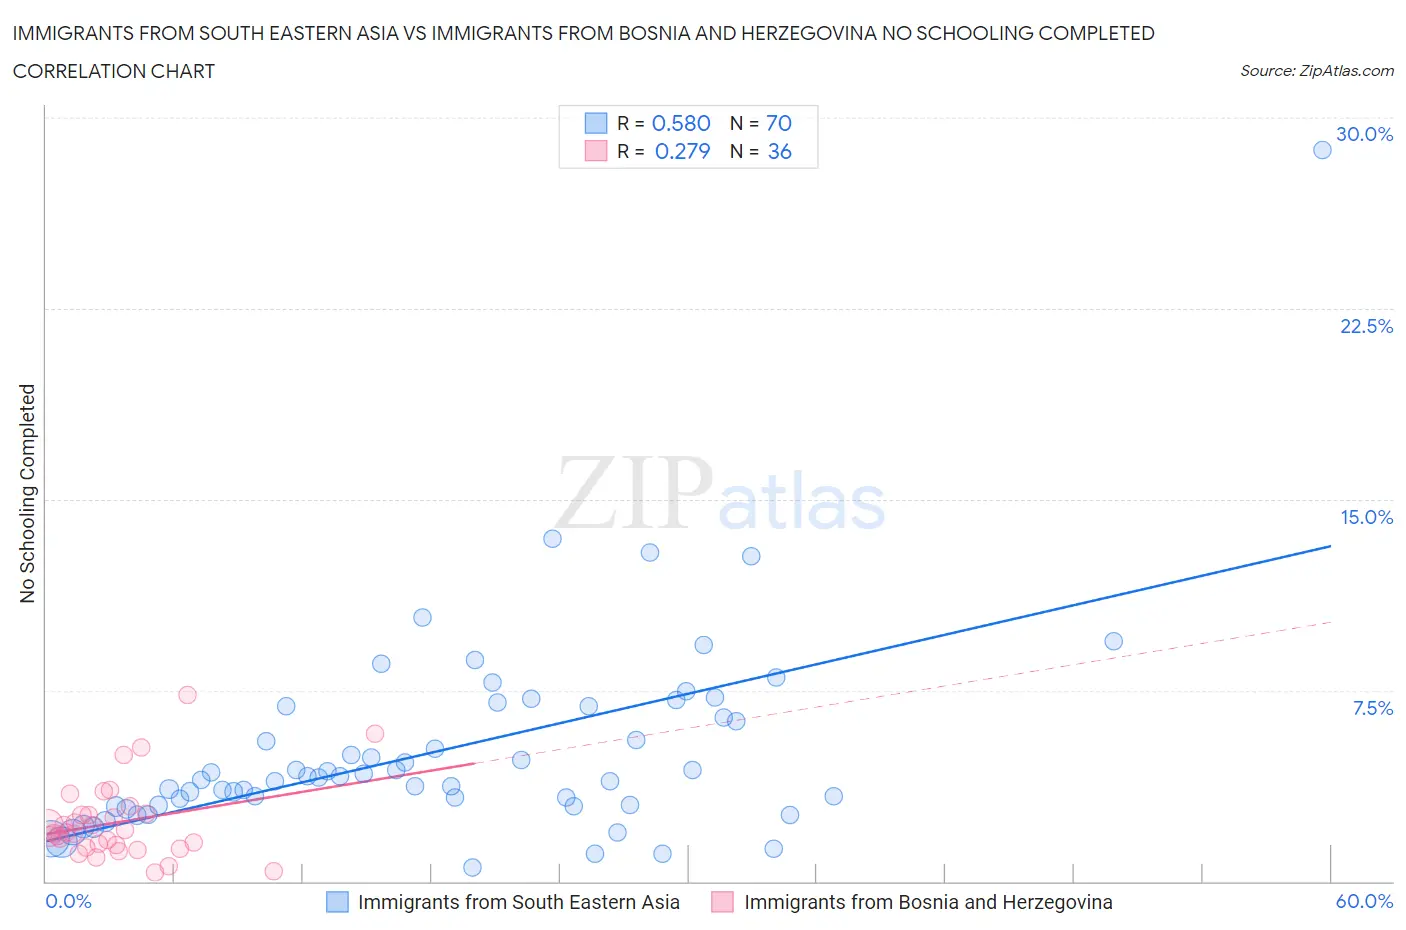 Immigrants from South Eastern Asia vs Immigrants from Bosnia and Herzegovina No Schooling Completed